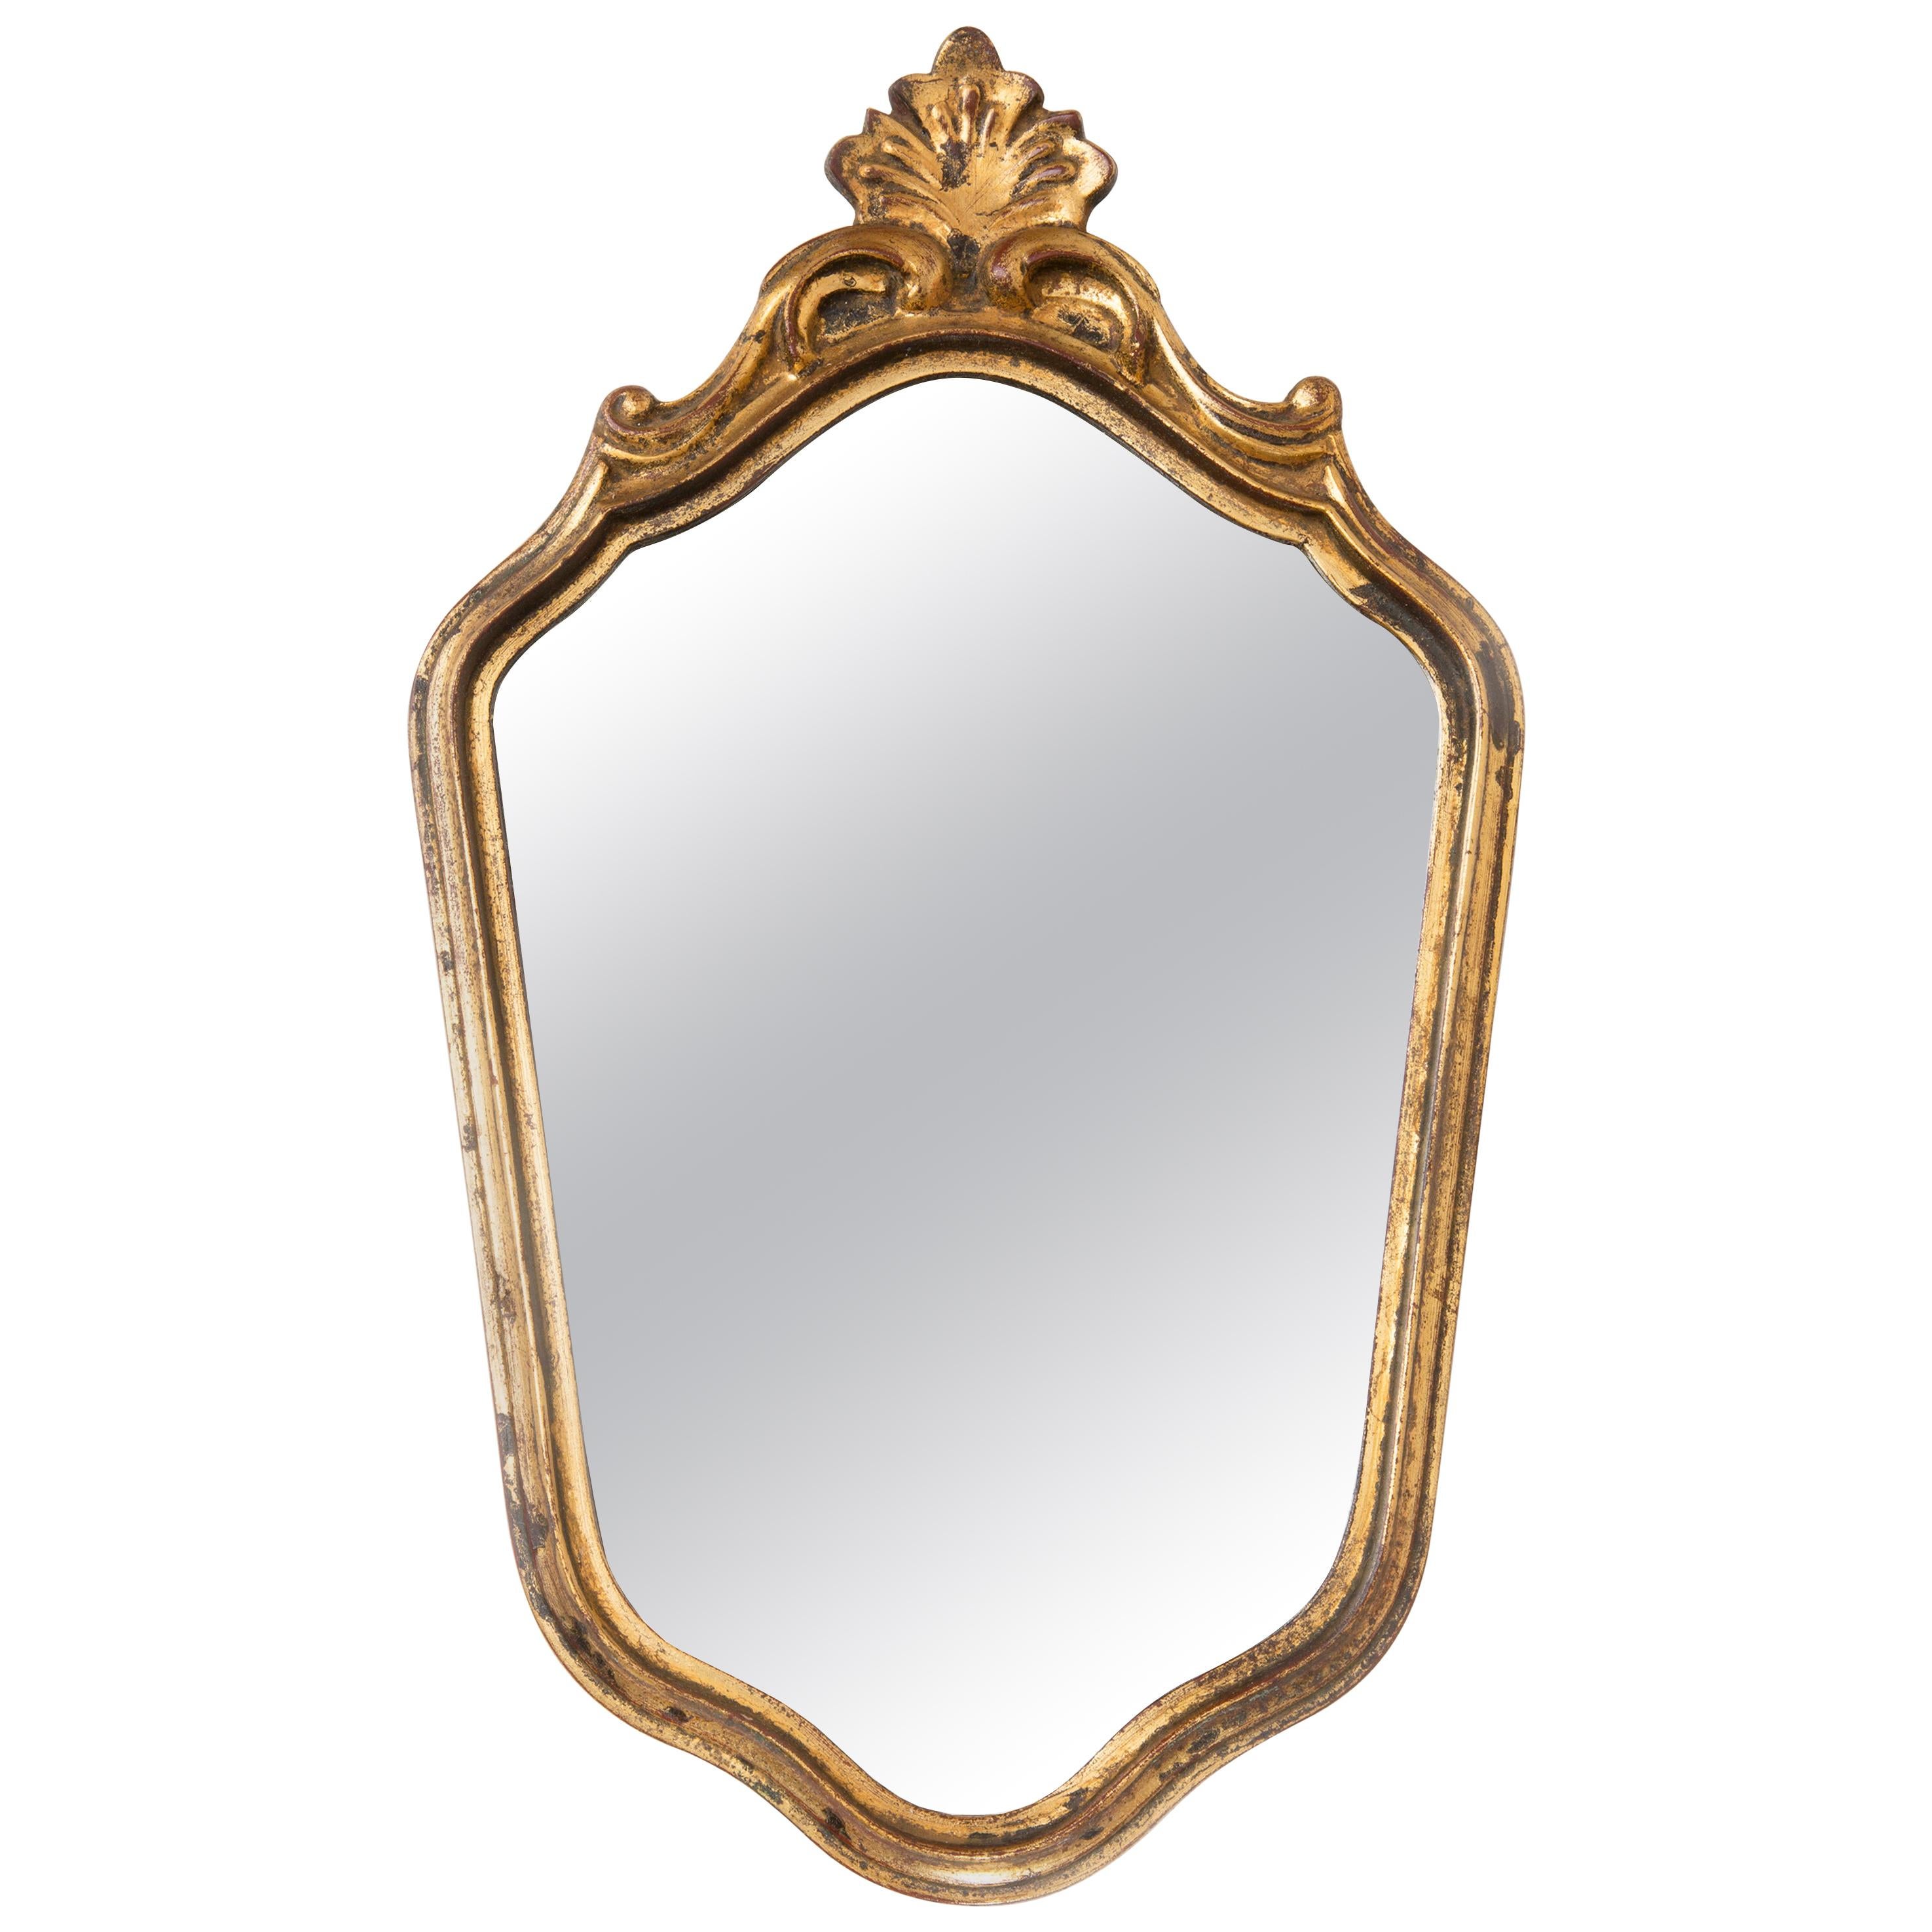 Midcentury Vintage Old Gold and Brown Mirror, Giltwood, Italy, 1960s